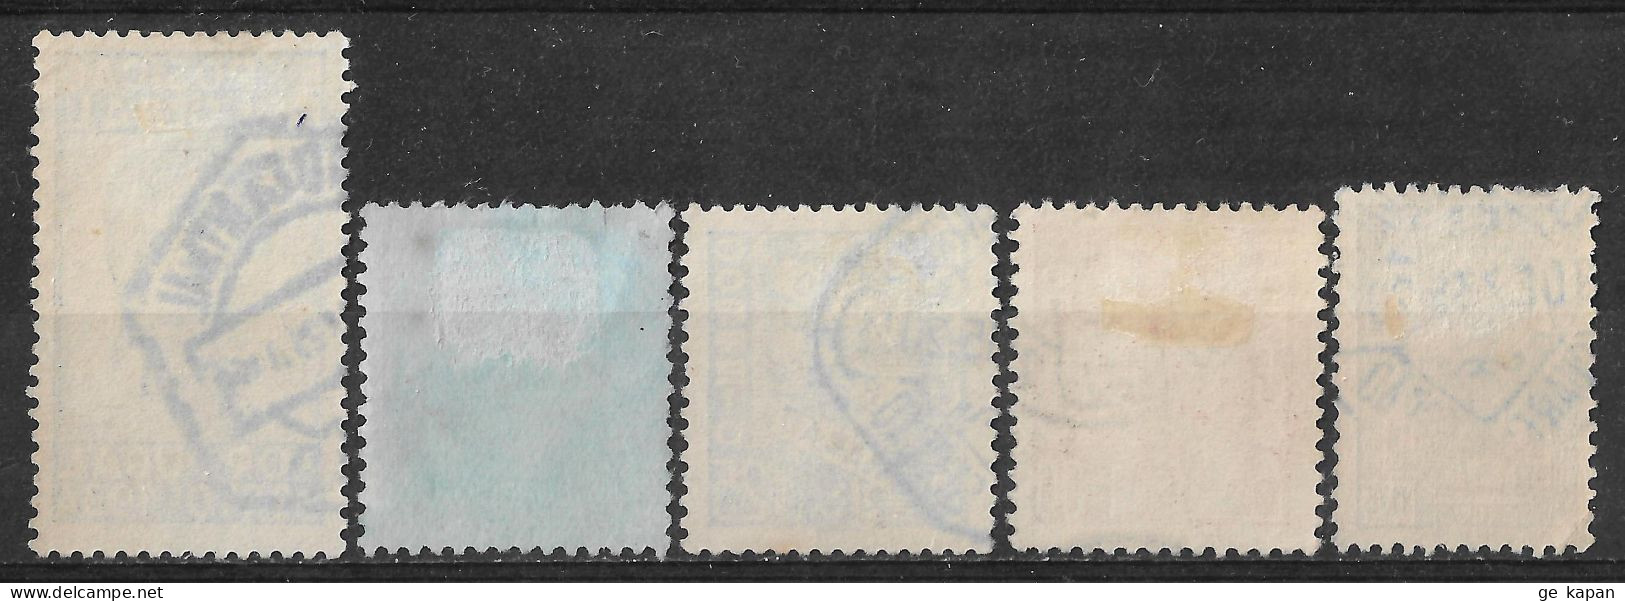 1934-1935 PORTUGAL SET OF 5 USED STAMPS (Michel # 580,585x,586,588,589) CV €22.30 - Usati